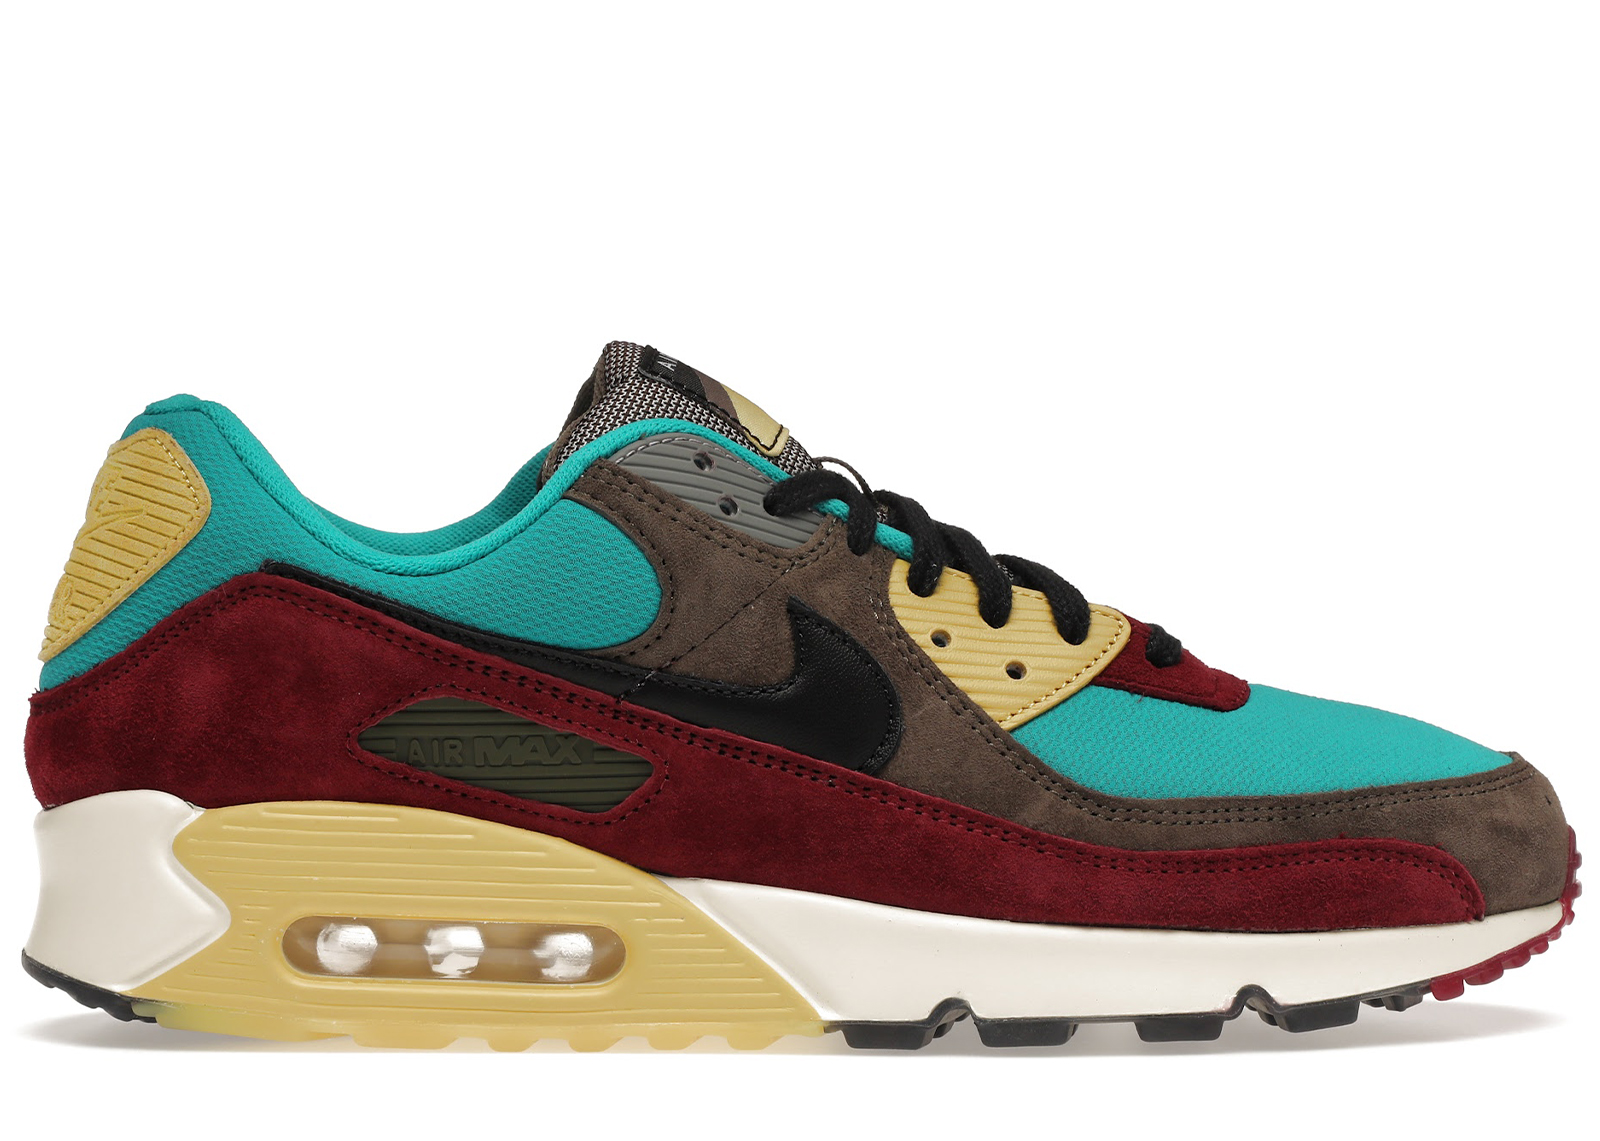 Buy Nike Air Max 90 Size 11 Shoes & New Sneakers - StockX